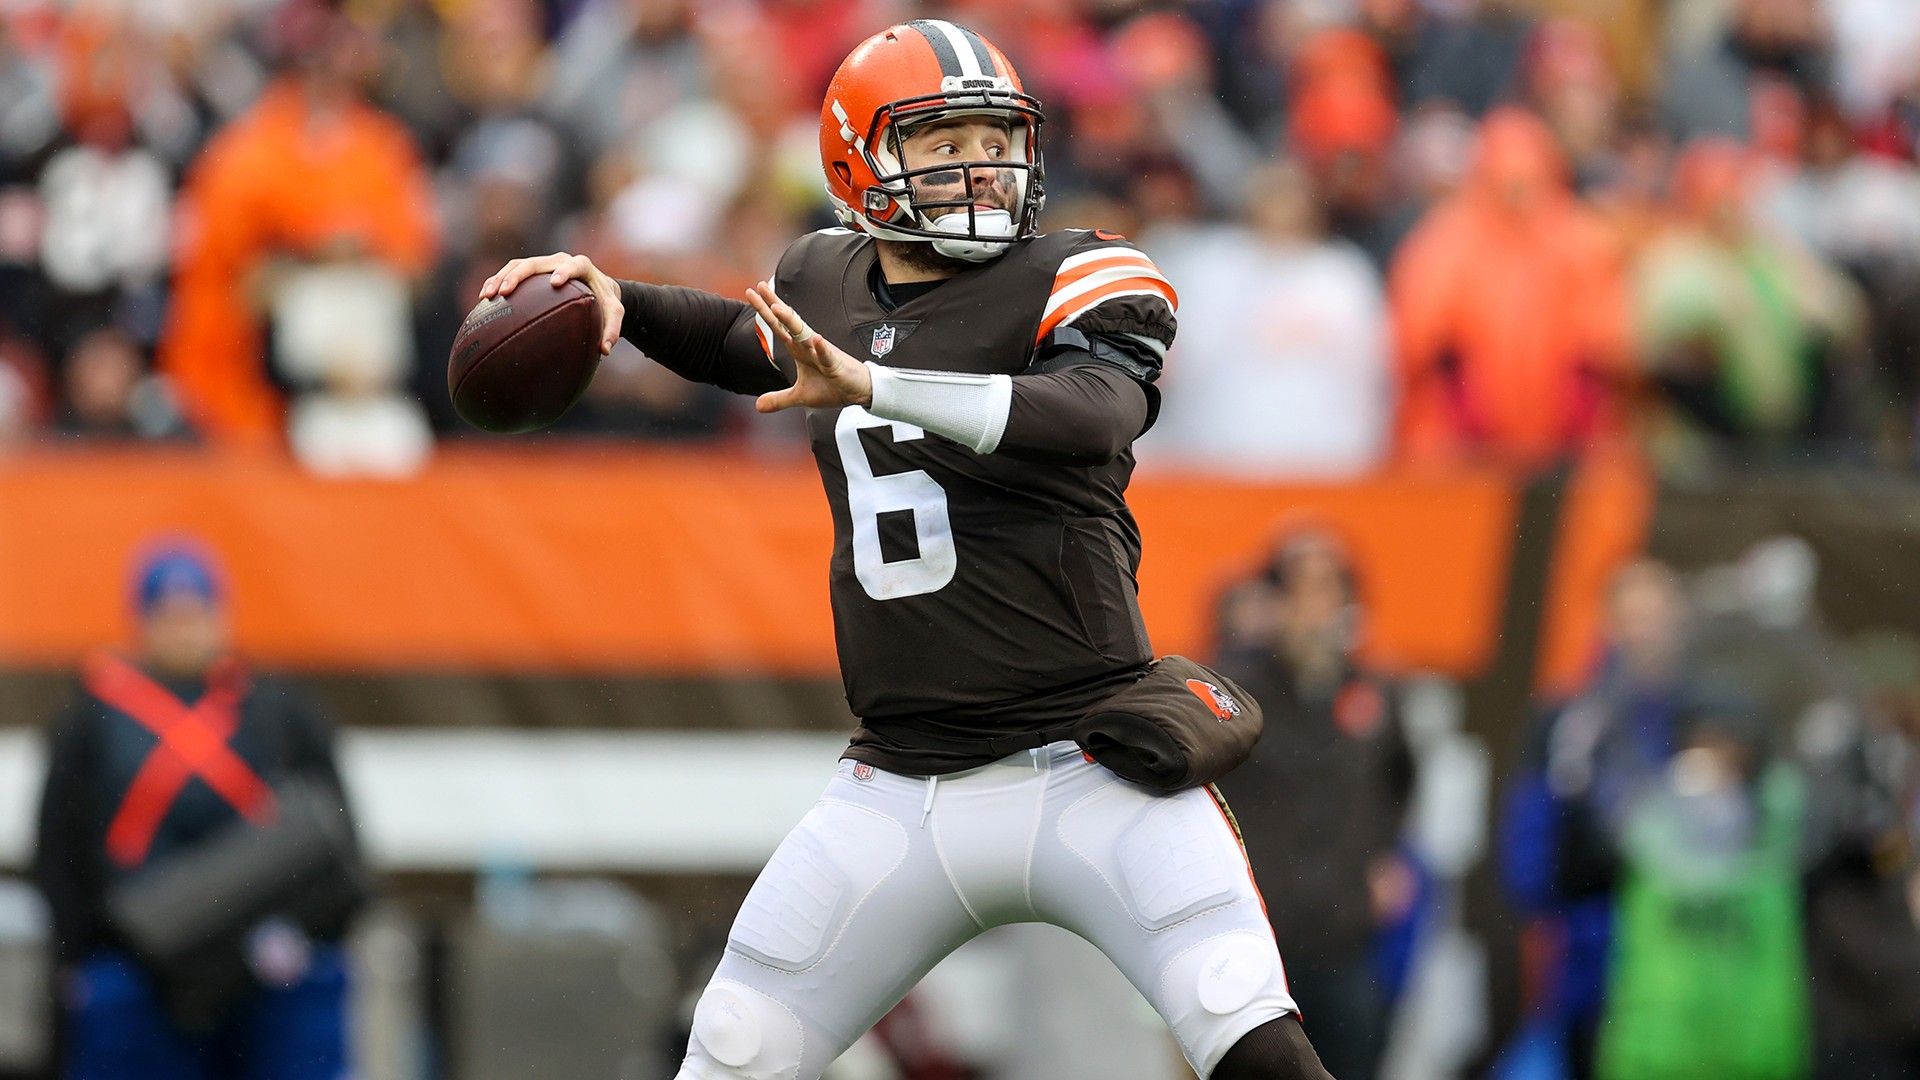 Cleveland Browns QB Baker Mayfield acts like 'punk' to fans, media